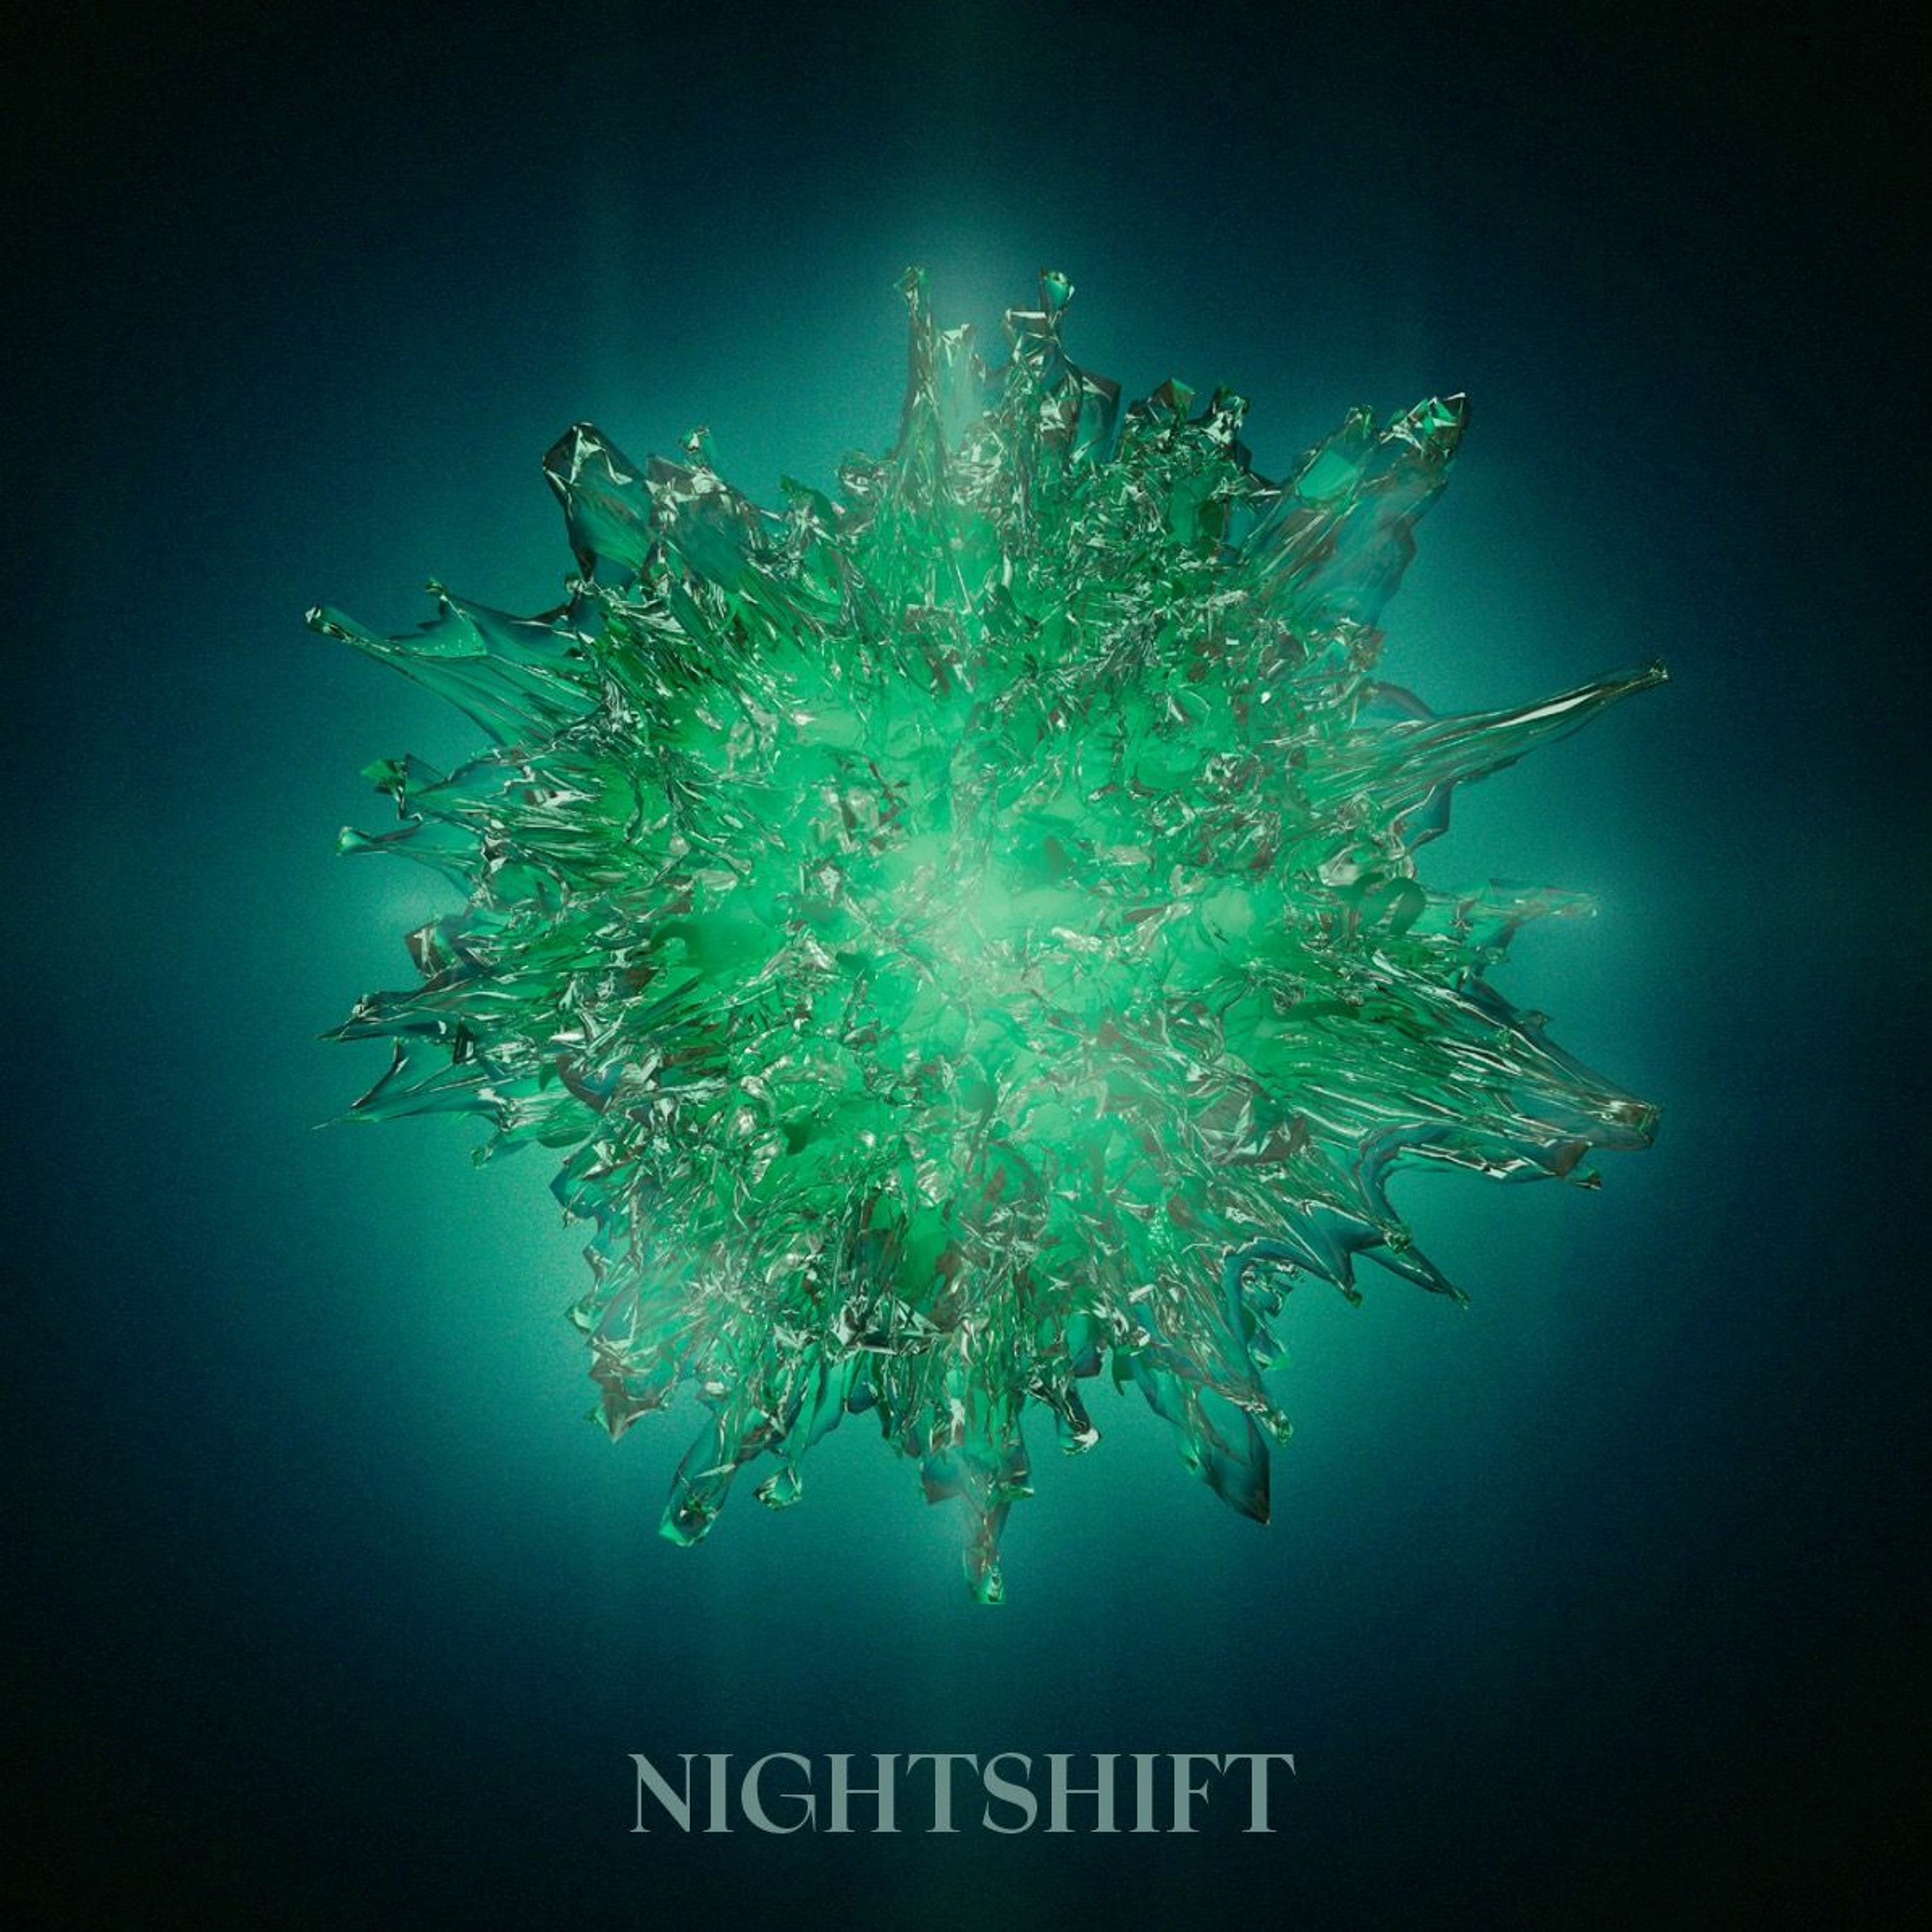 Nightshift #5: Minimal-influence in contemporary ambient organ works